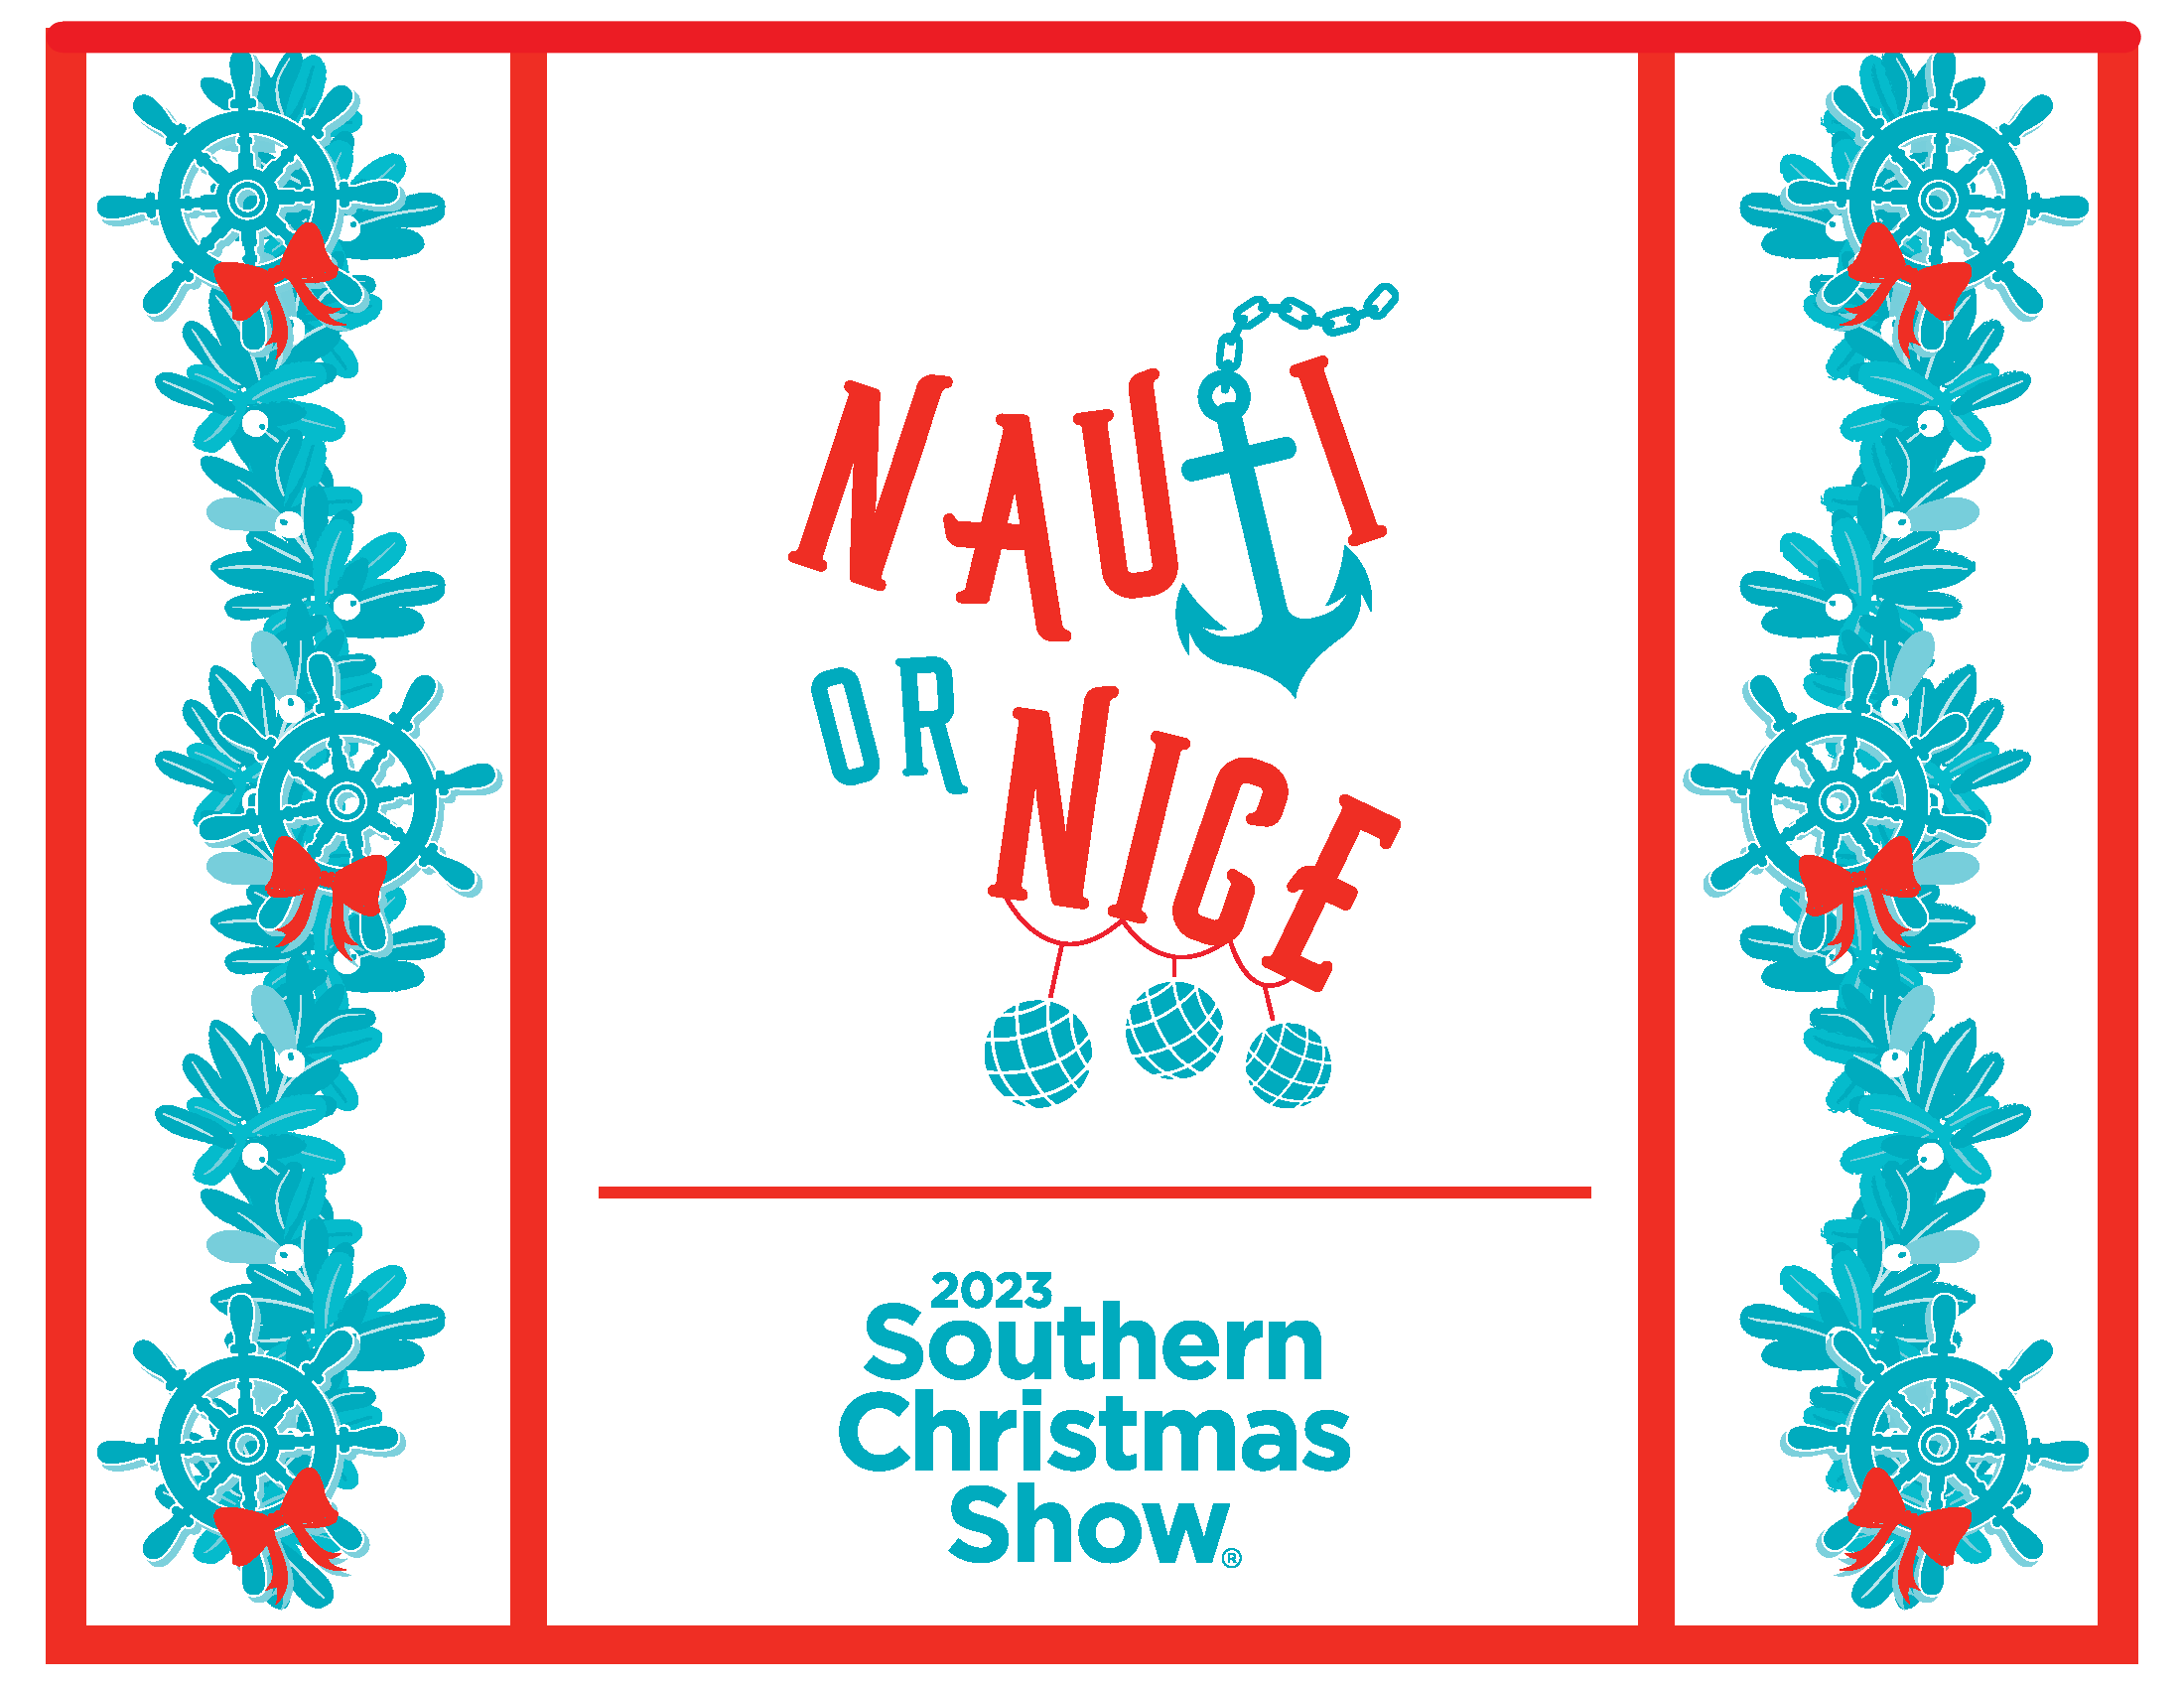 Features of the Southern Christmas Show Charlotte, NC